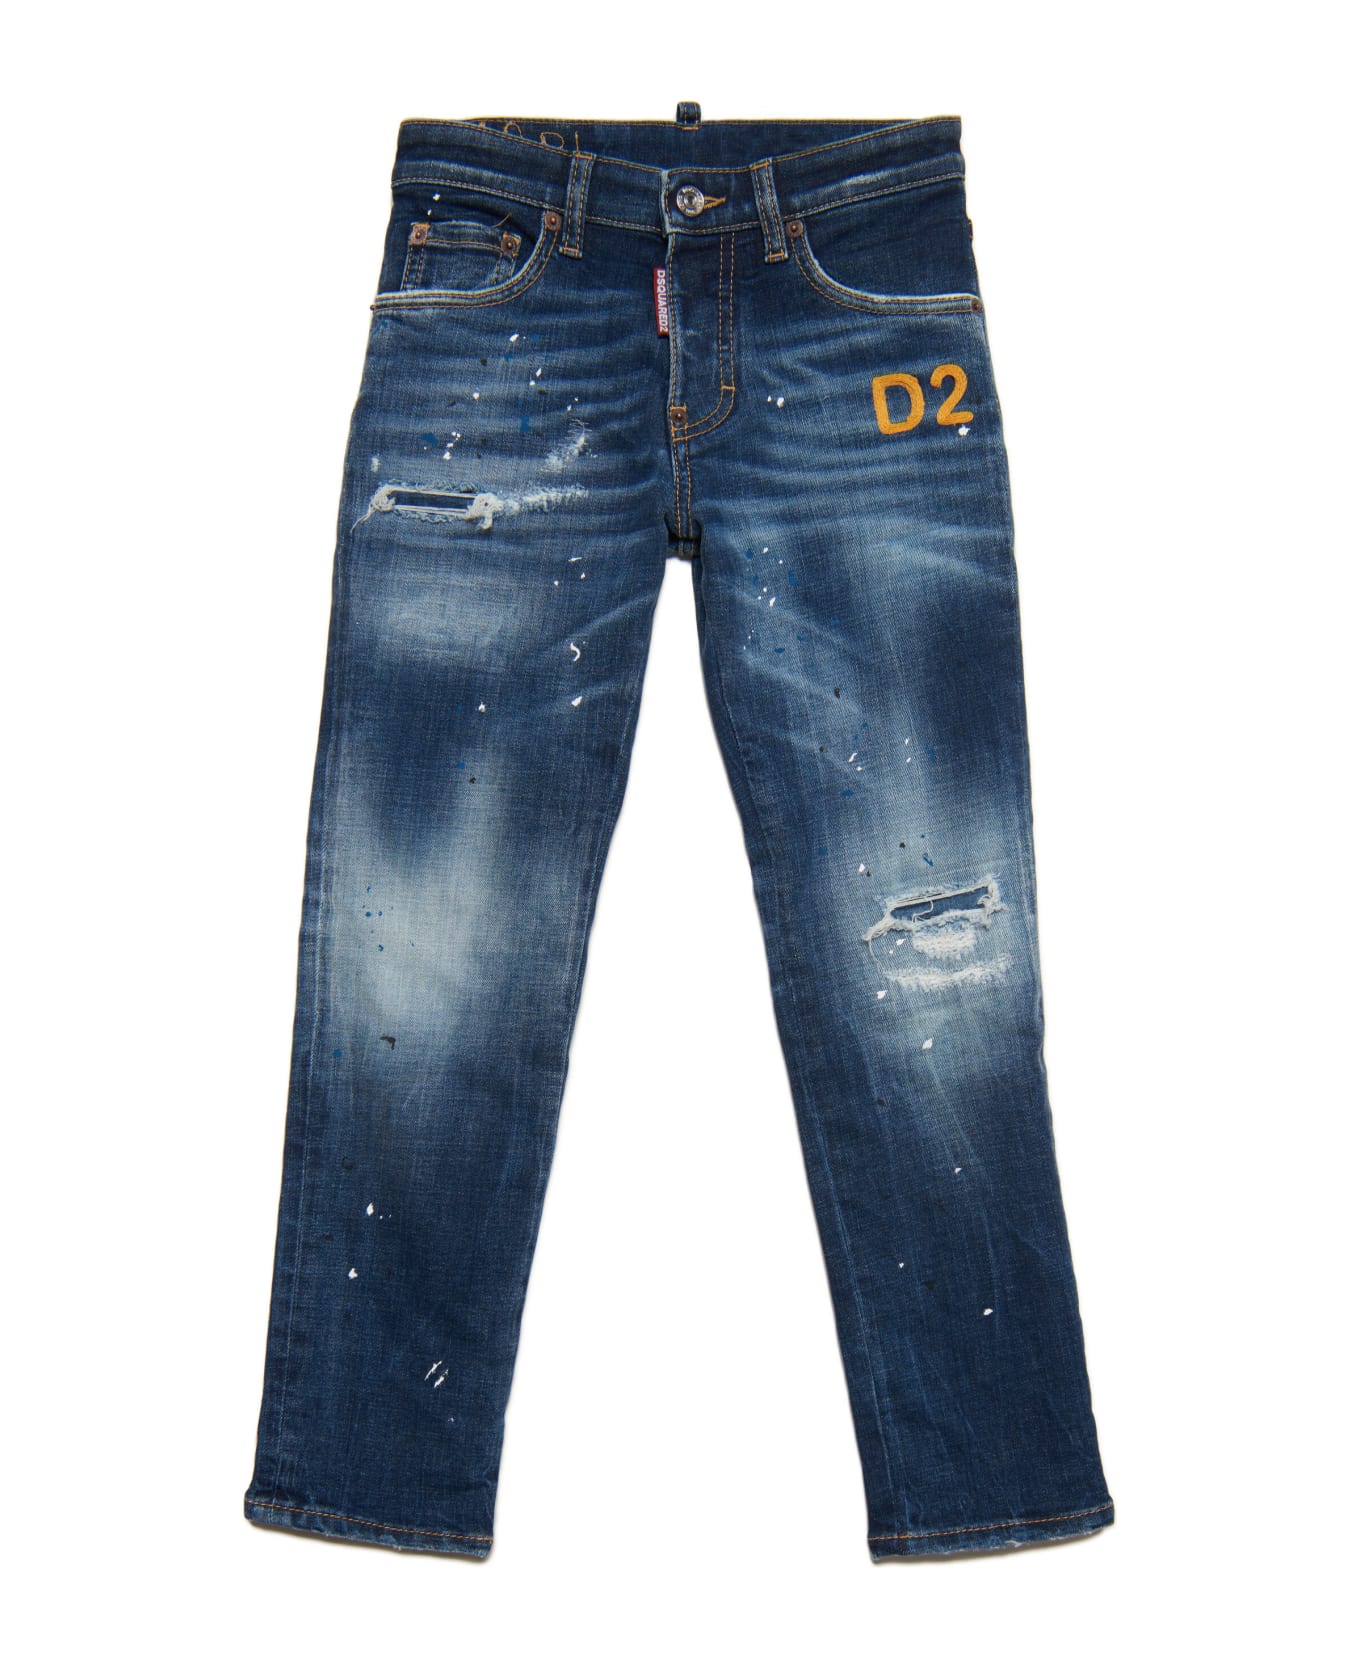 Dsquared2 D2p438u Stanislav Jean Trousers Dsquared Stanislav Jeans Straight Medium Blue Shaded With Breaks And Patches - Blue Denim ボトムス